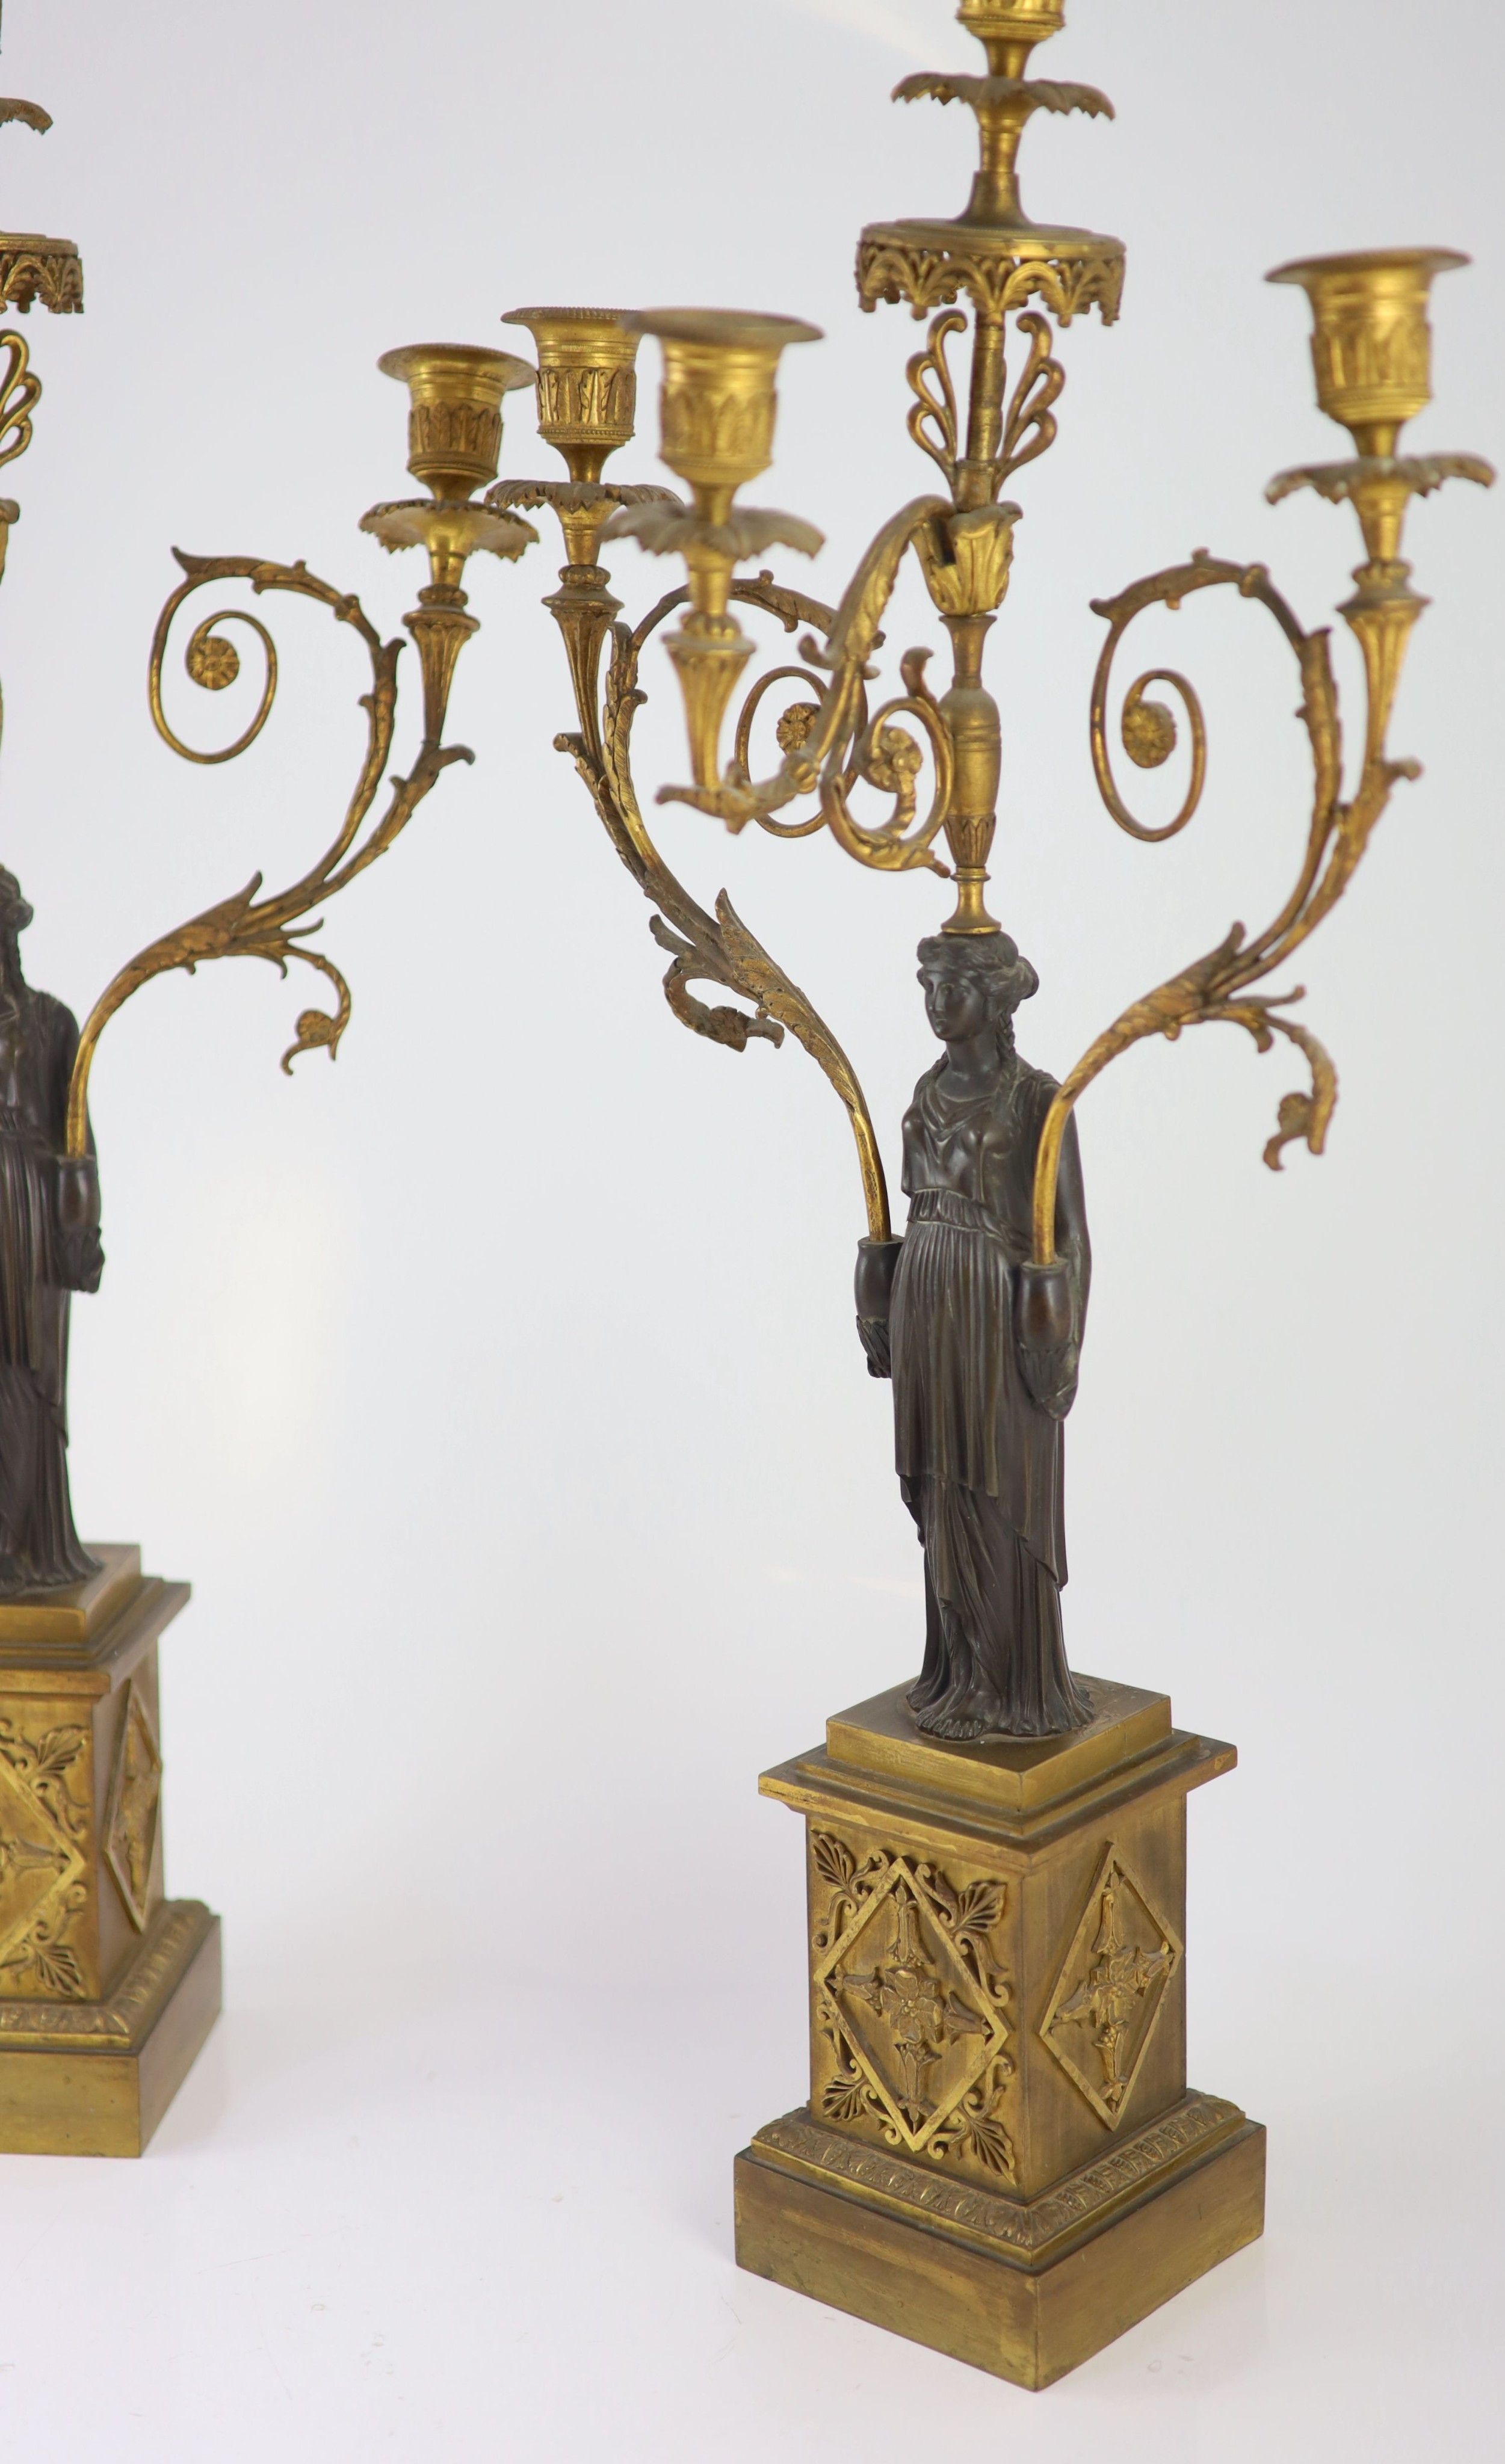 A pair of 19th-century French bronze and ormolu candelabrawith scrolling branches and classical - Image 3 of 4